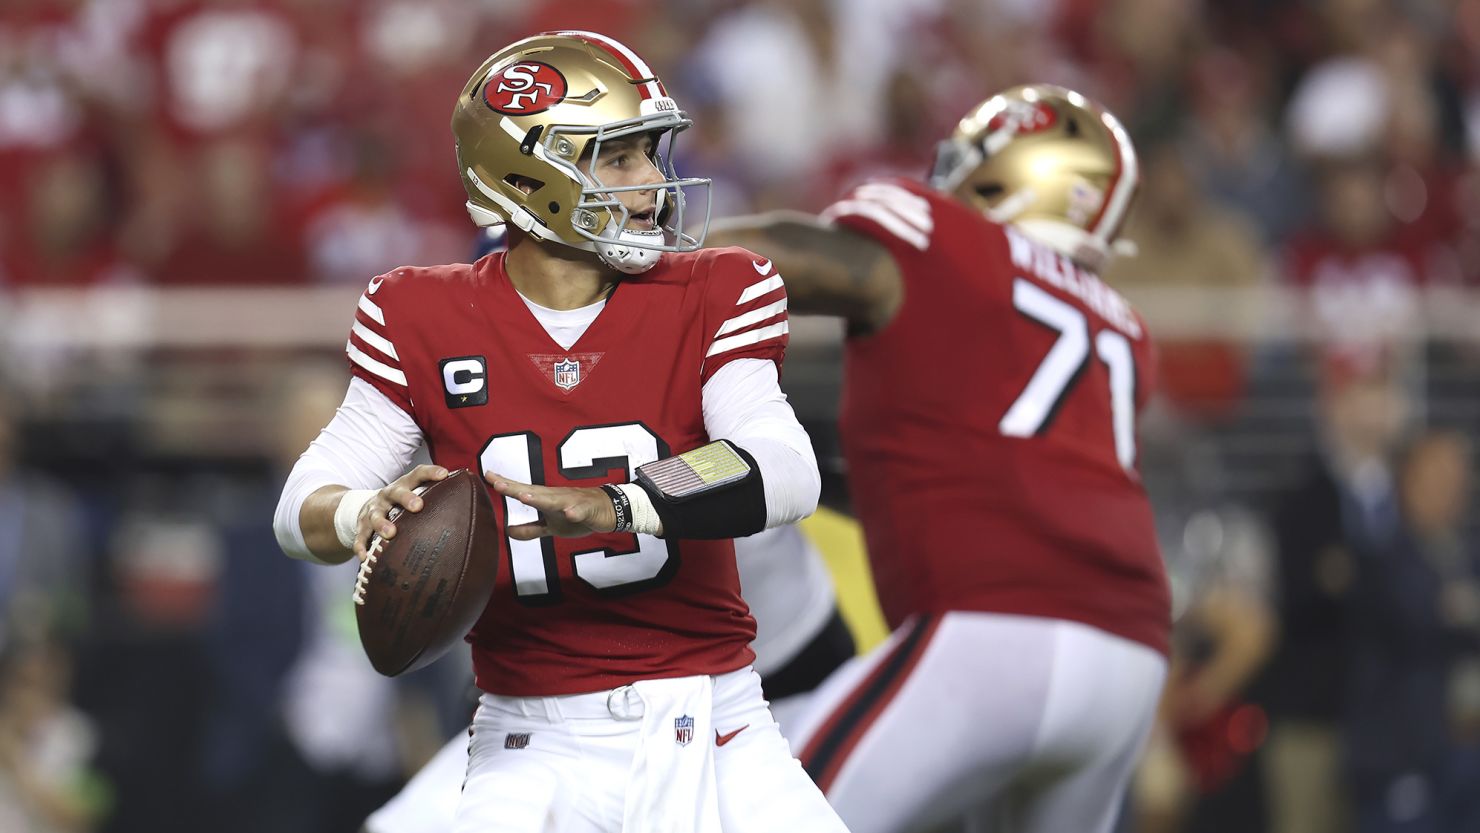 San Francisco 49ers quarterback Brock Purdy (13) passes against the New York Giants during the second half of an NFL football game in Santa Clara, Calif., Thursday, Sept. 21, 2023. (AP Photo/Jed Jacobsohn)